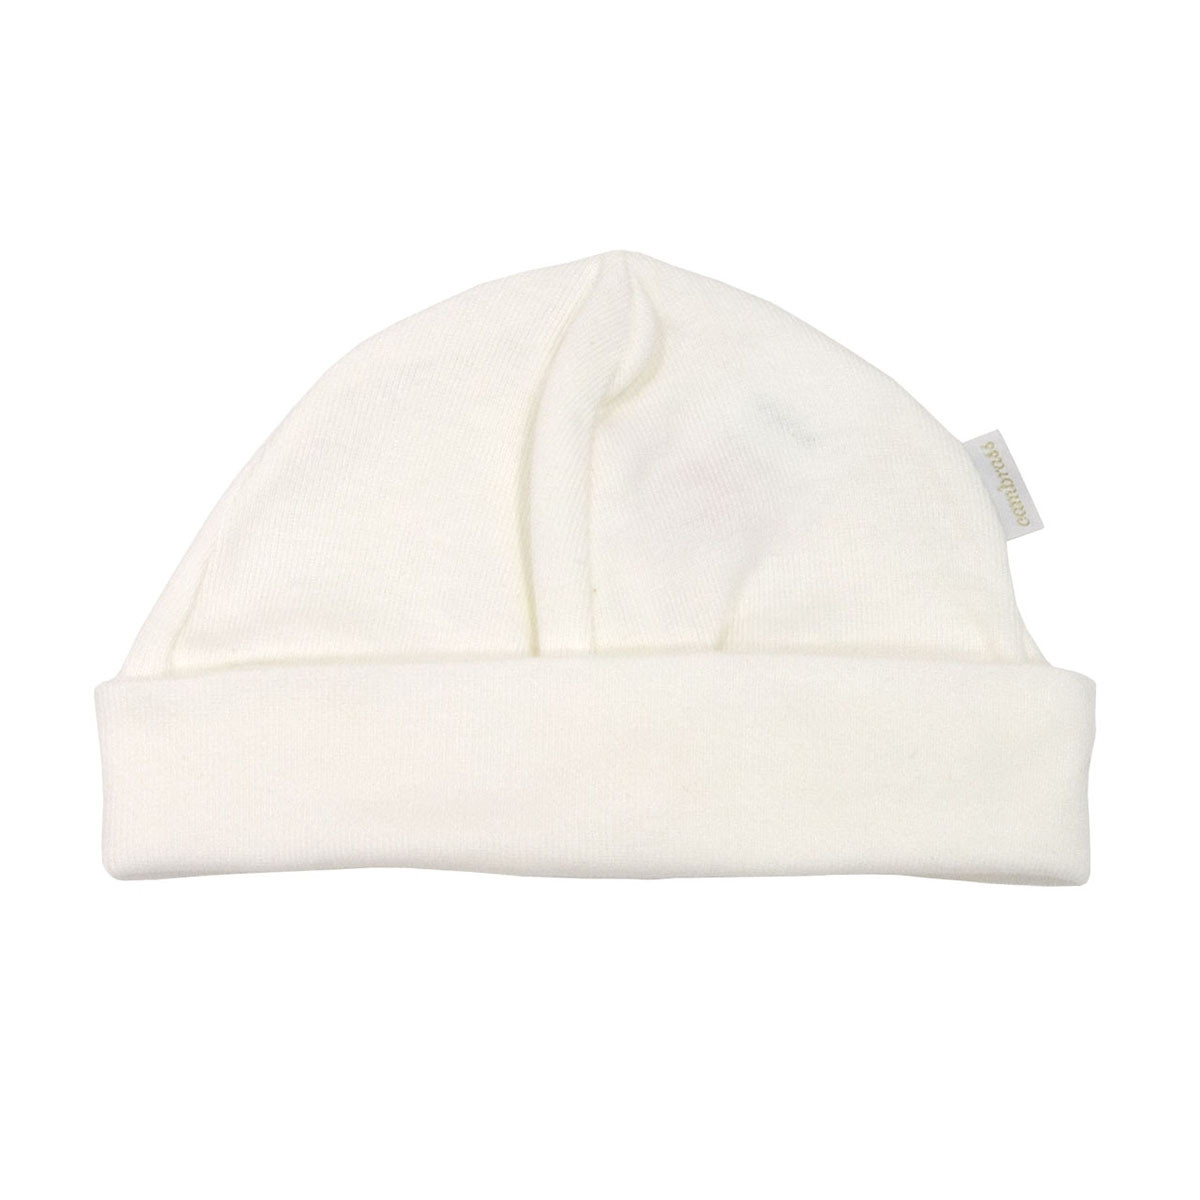 TRICOT CAP LISO BEIGE CAMBRASS - 1